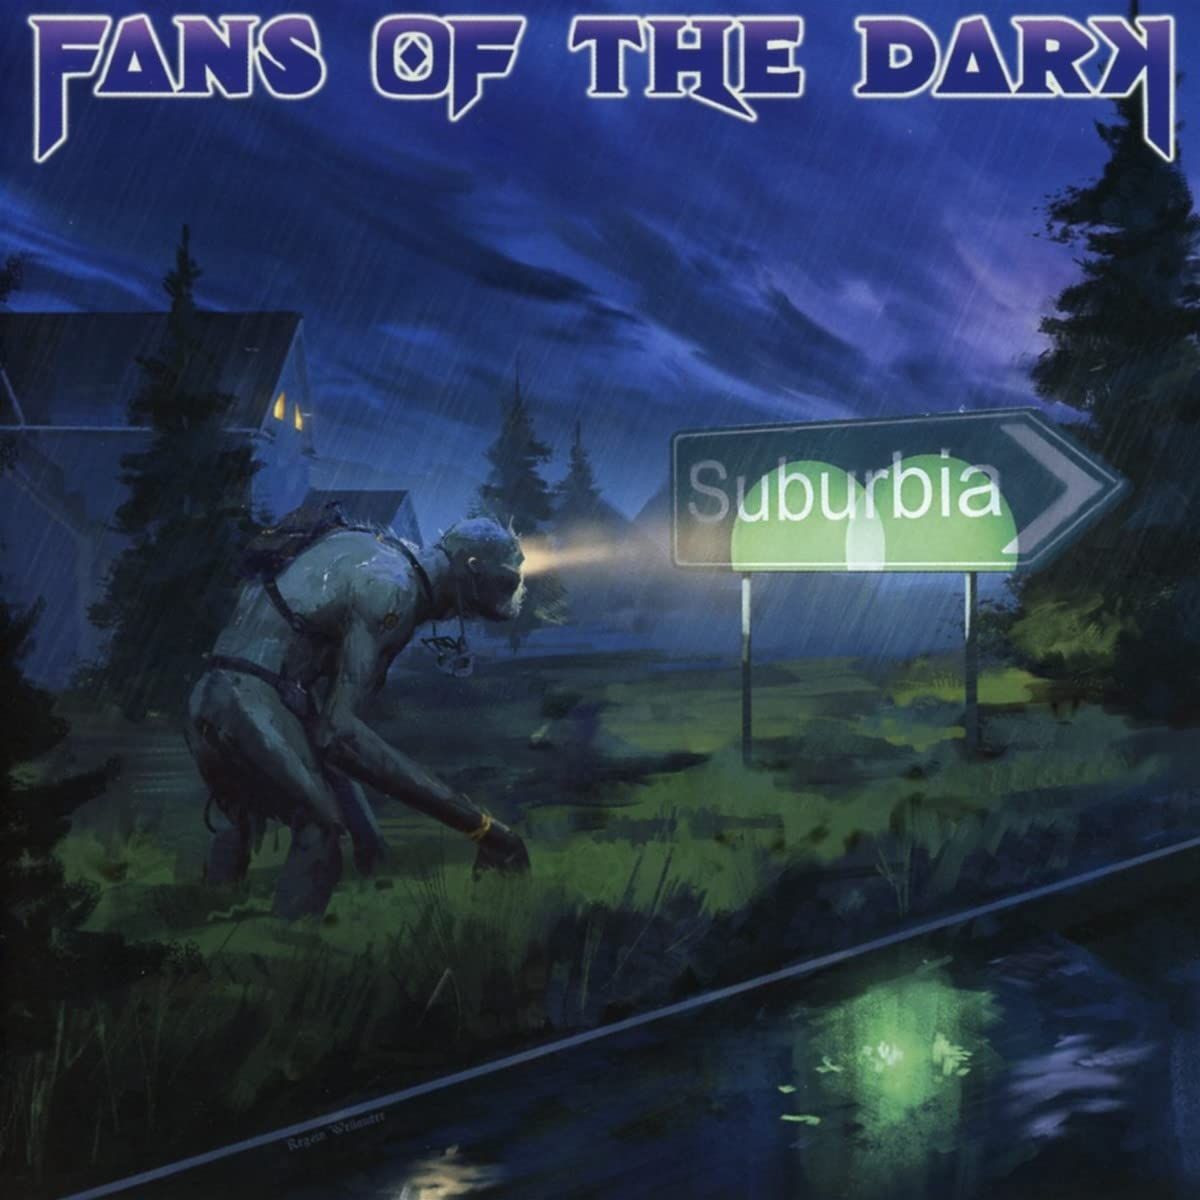 Fans Of The Dark - Suburbia - CD - New